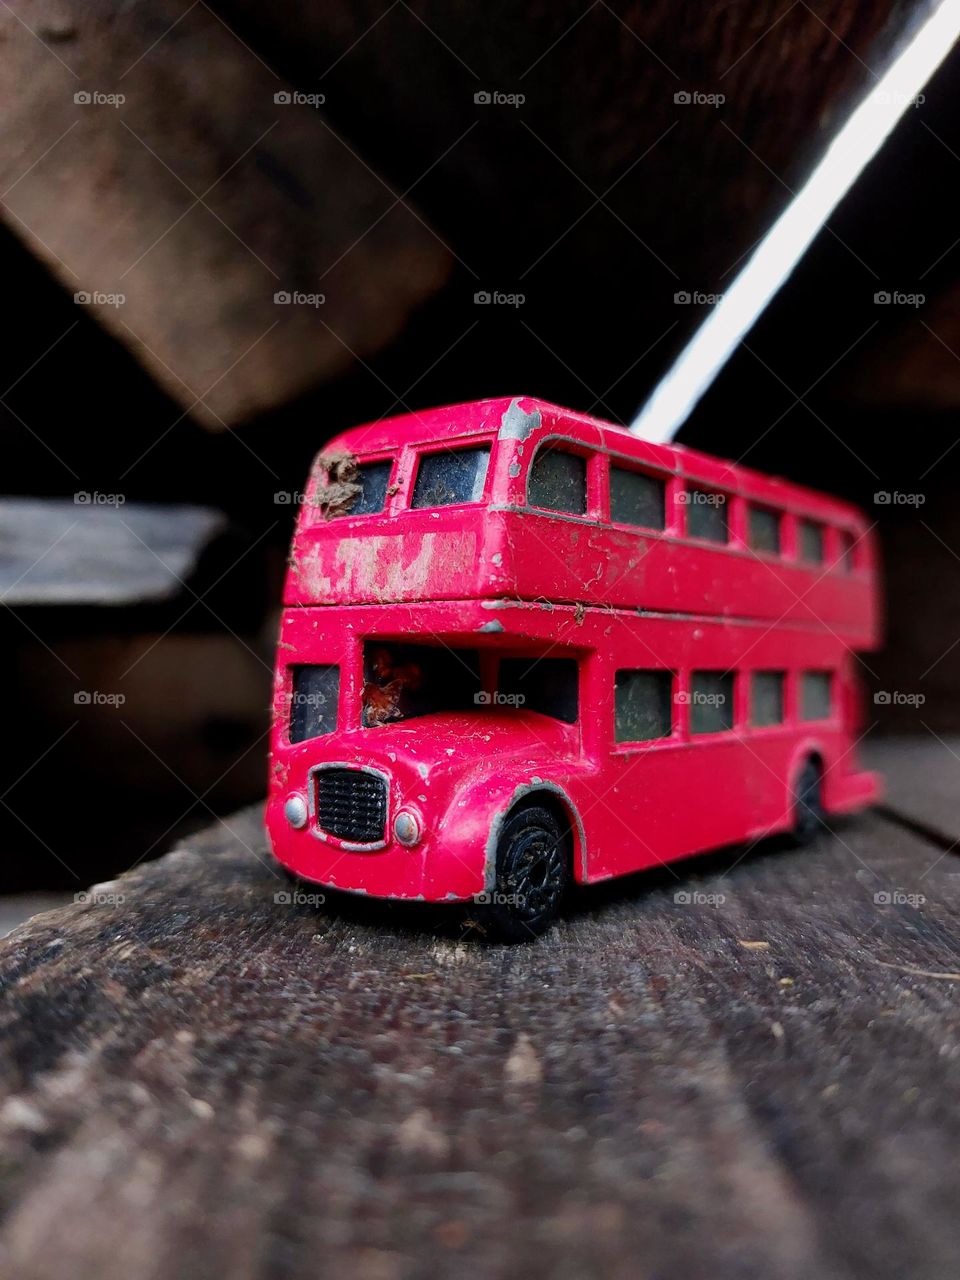 red metal buss toy found outside.